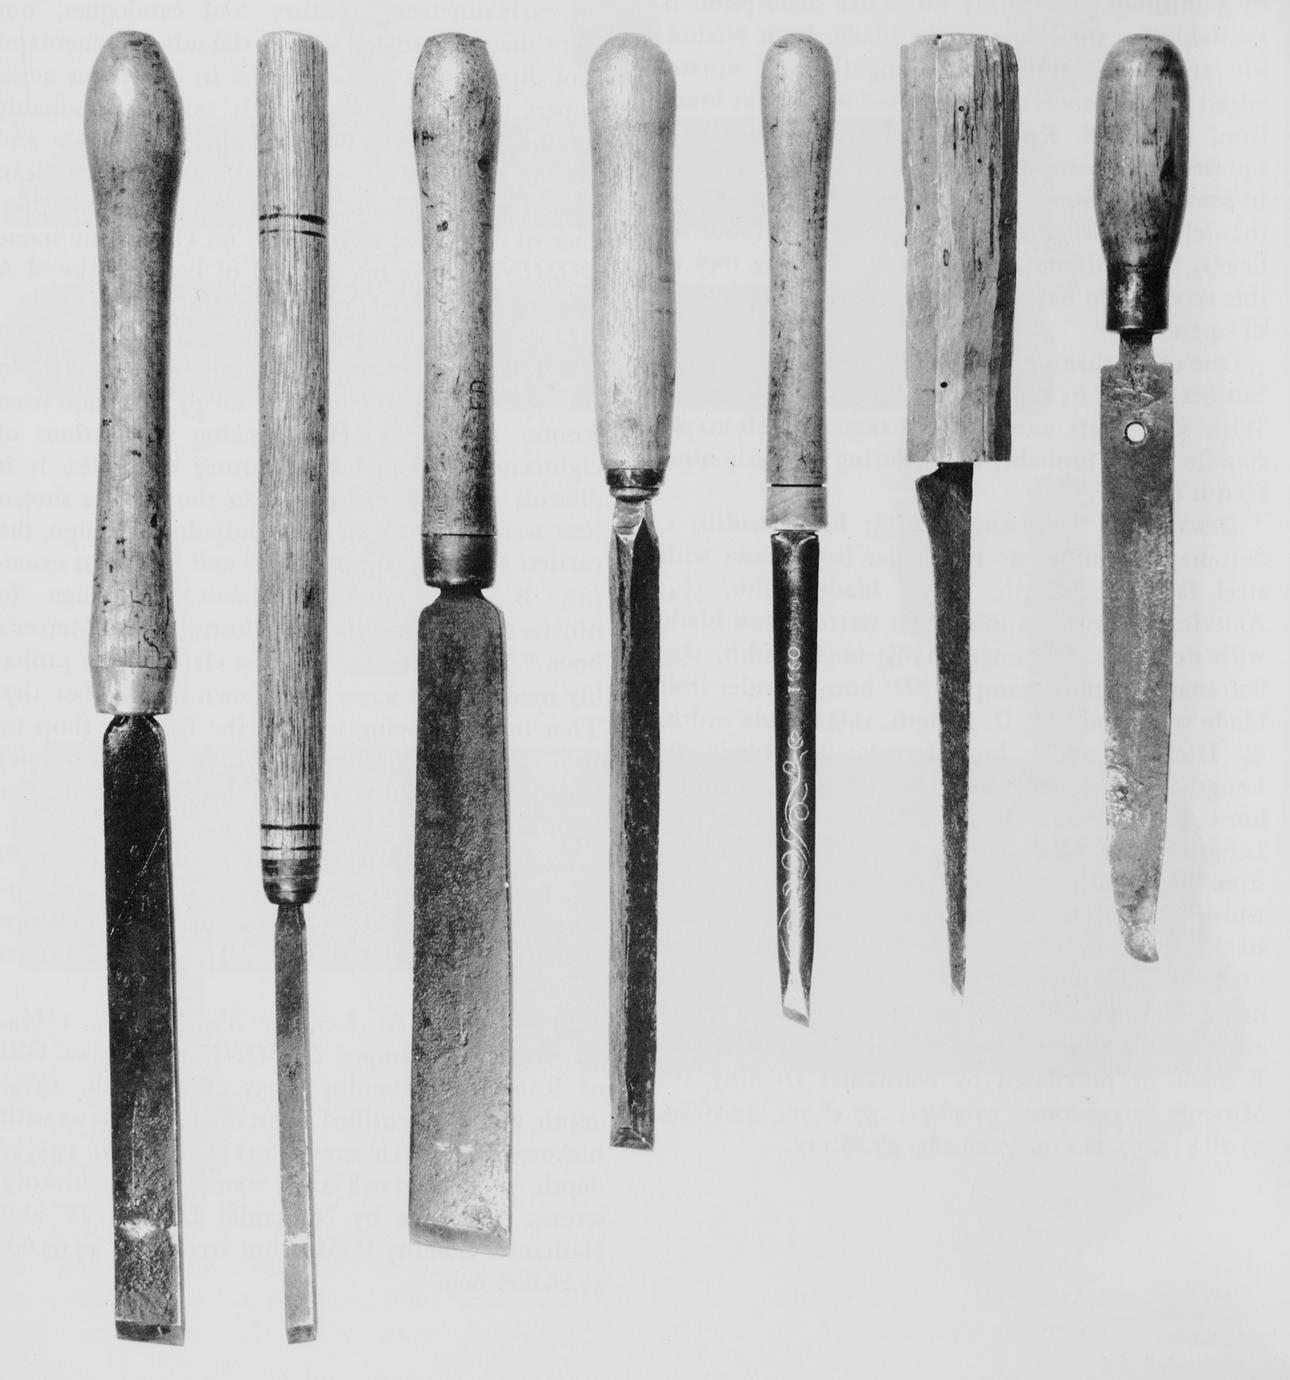 Seven examples of different sizes and shapes of turning chisels.